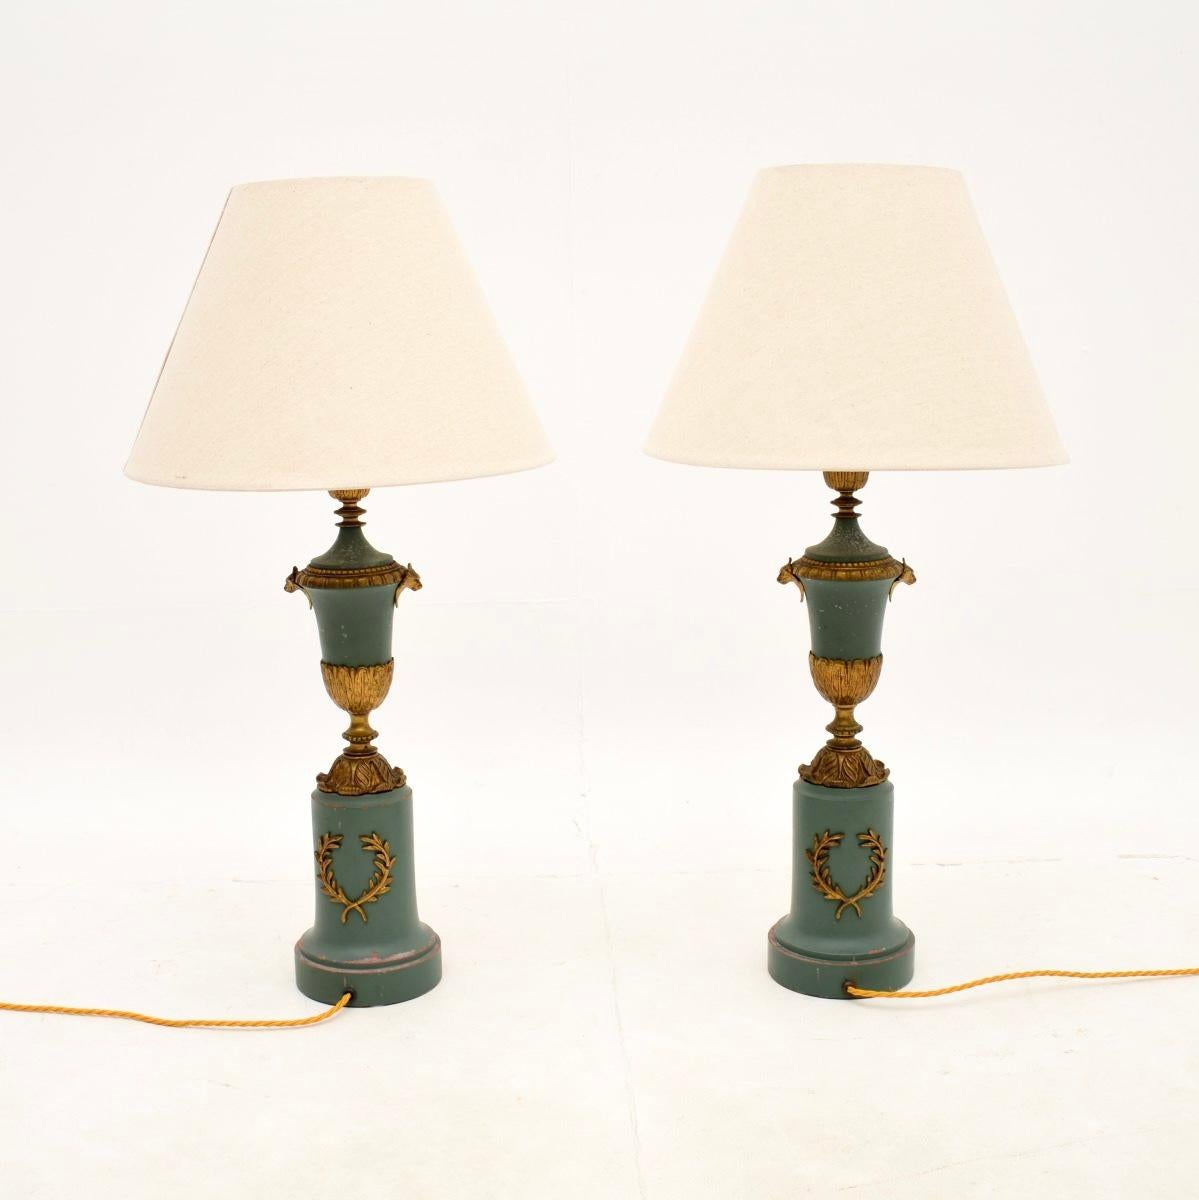 Neoclassical Pair of Antique French Neo Classical Table Lamps For Sale